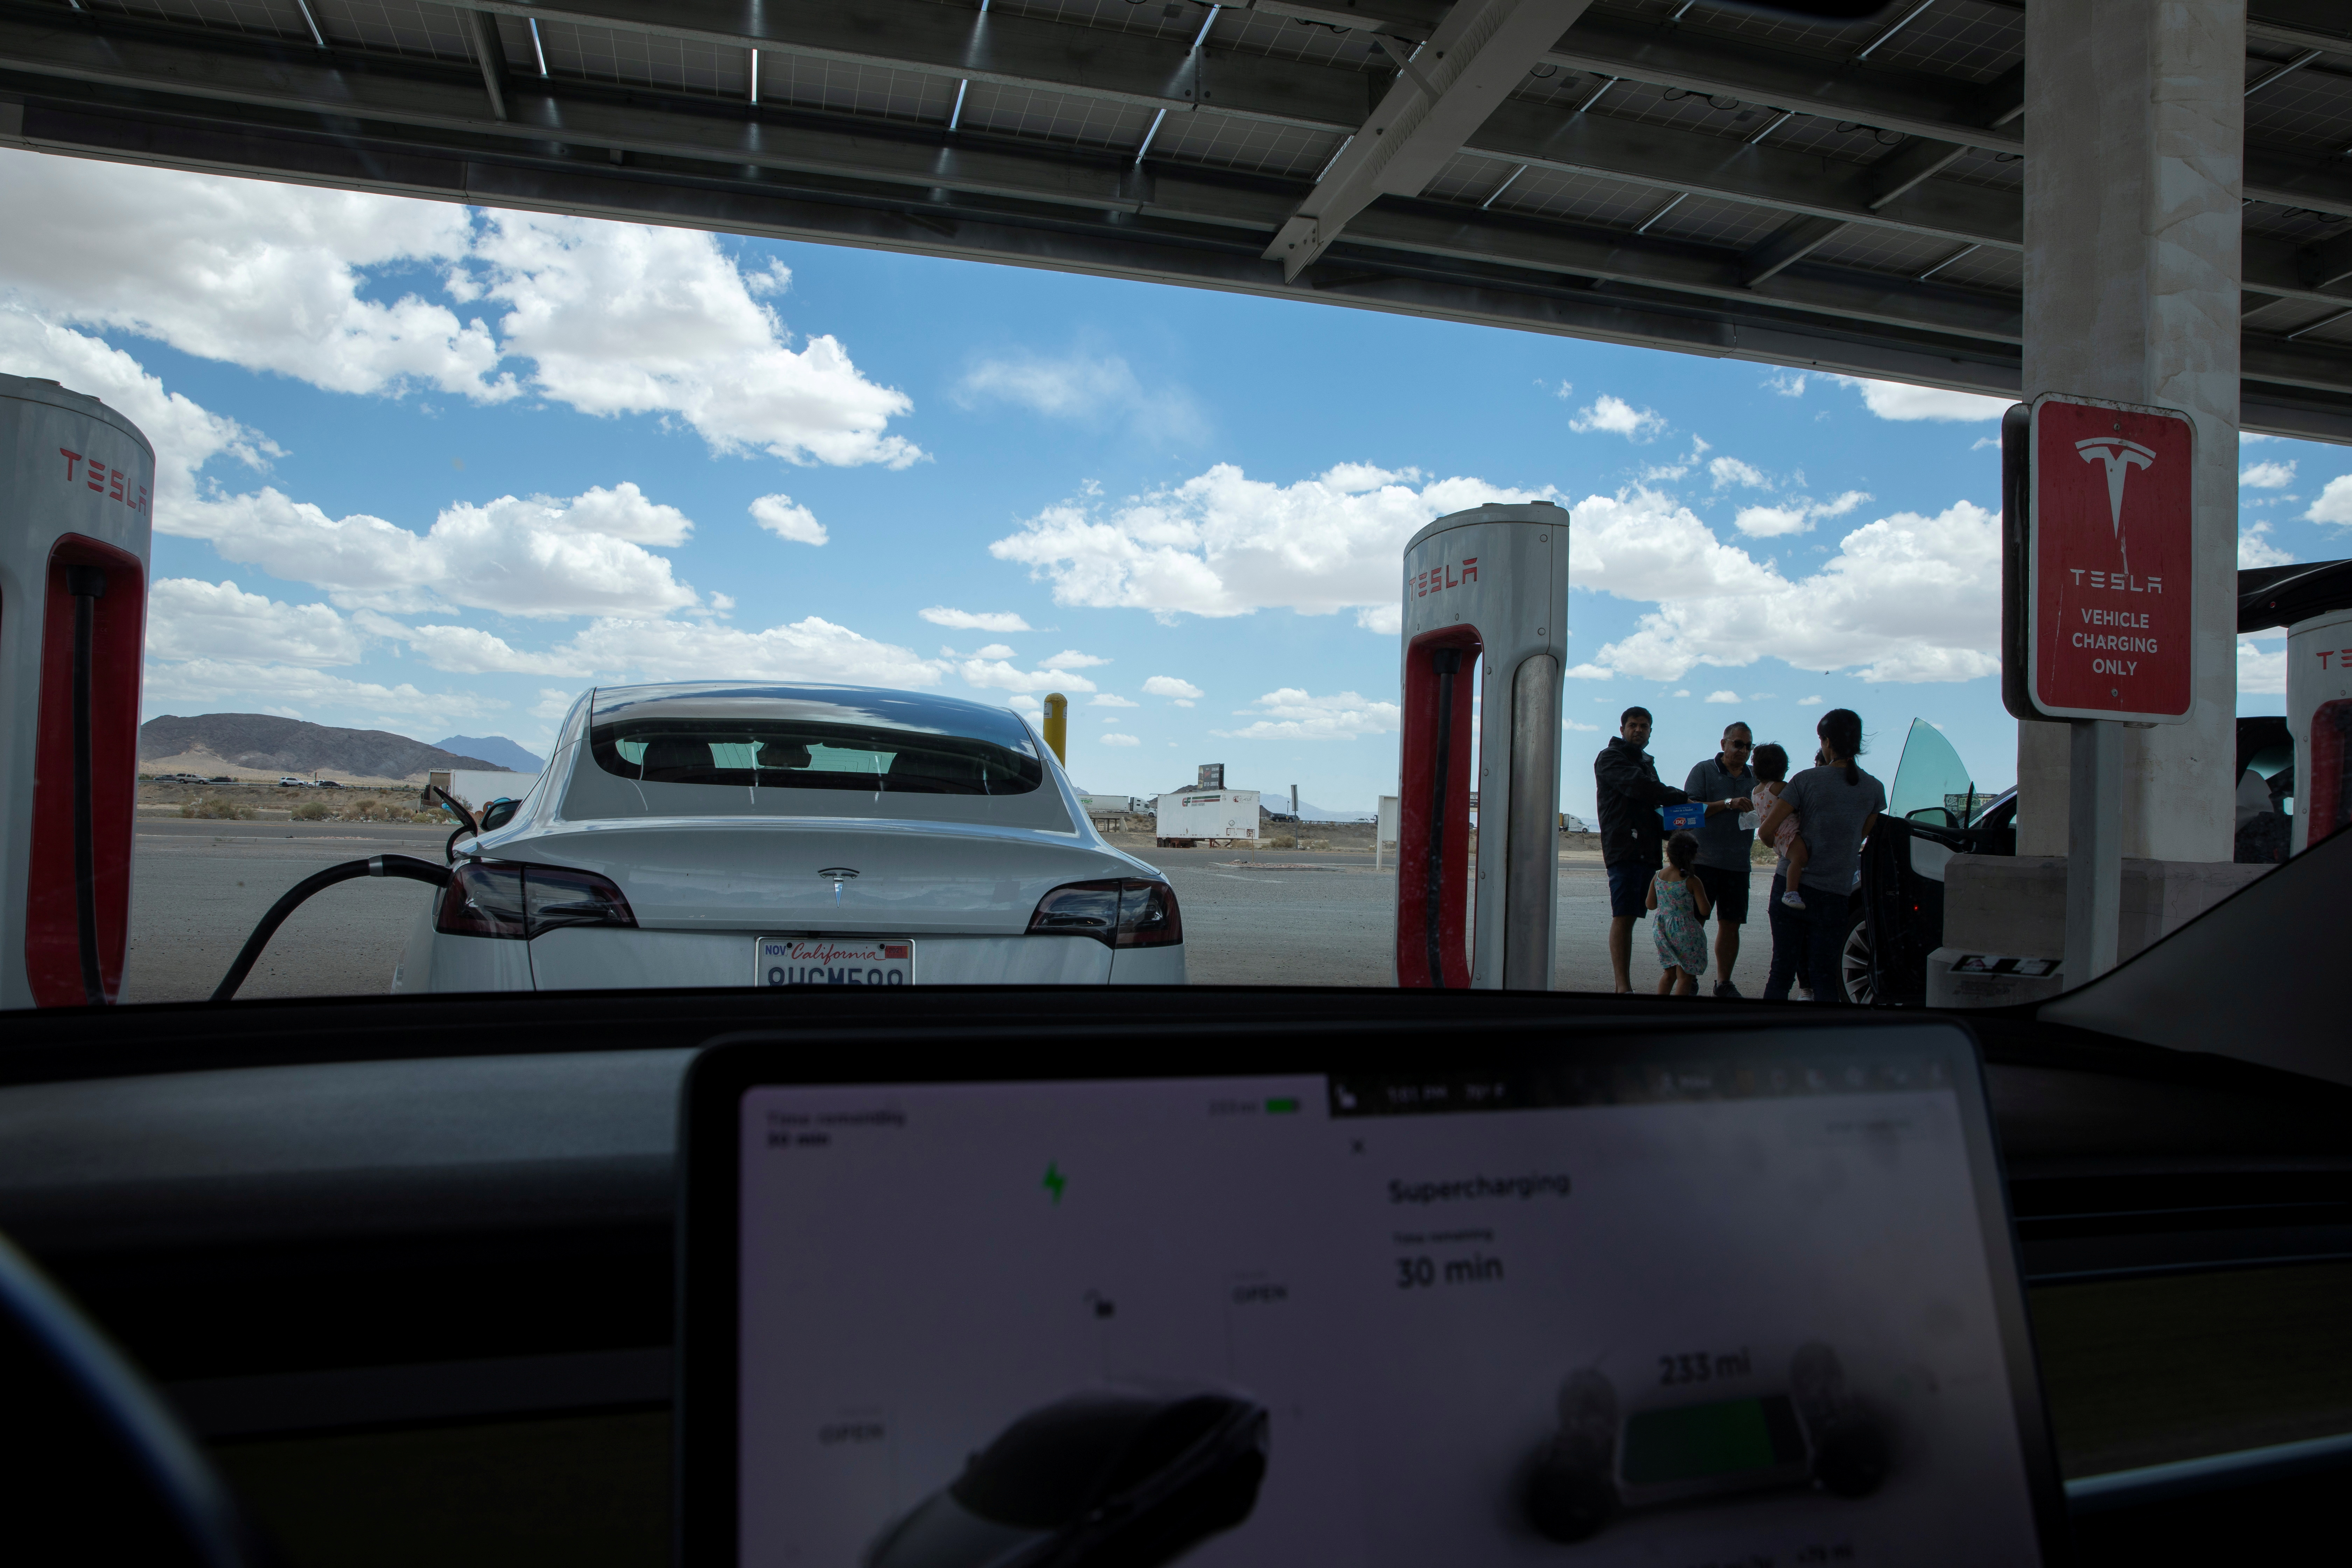 Tesla electric vehicles recharge at a large supercharging station located between Los Angeles and Las Vegas